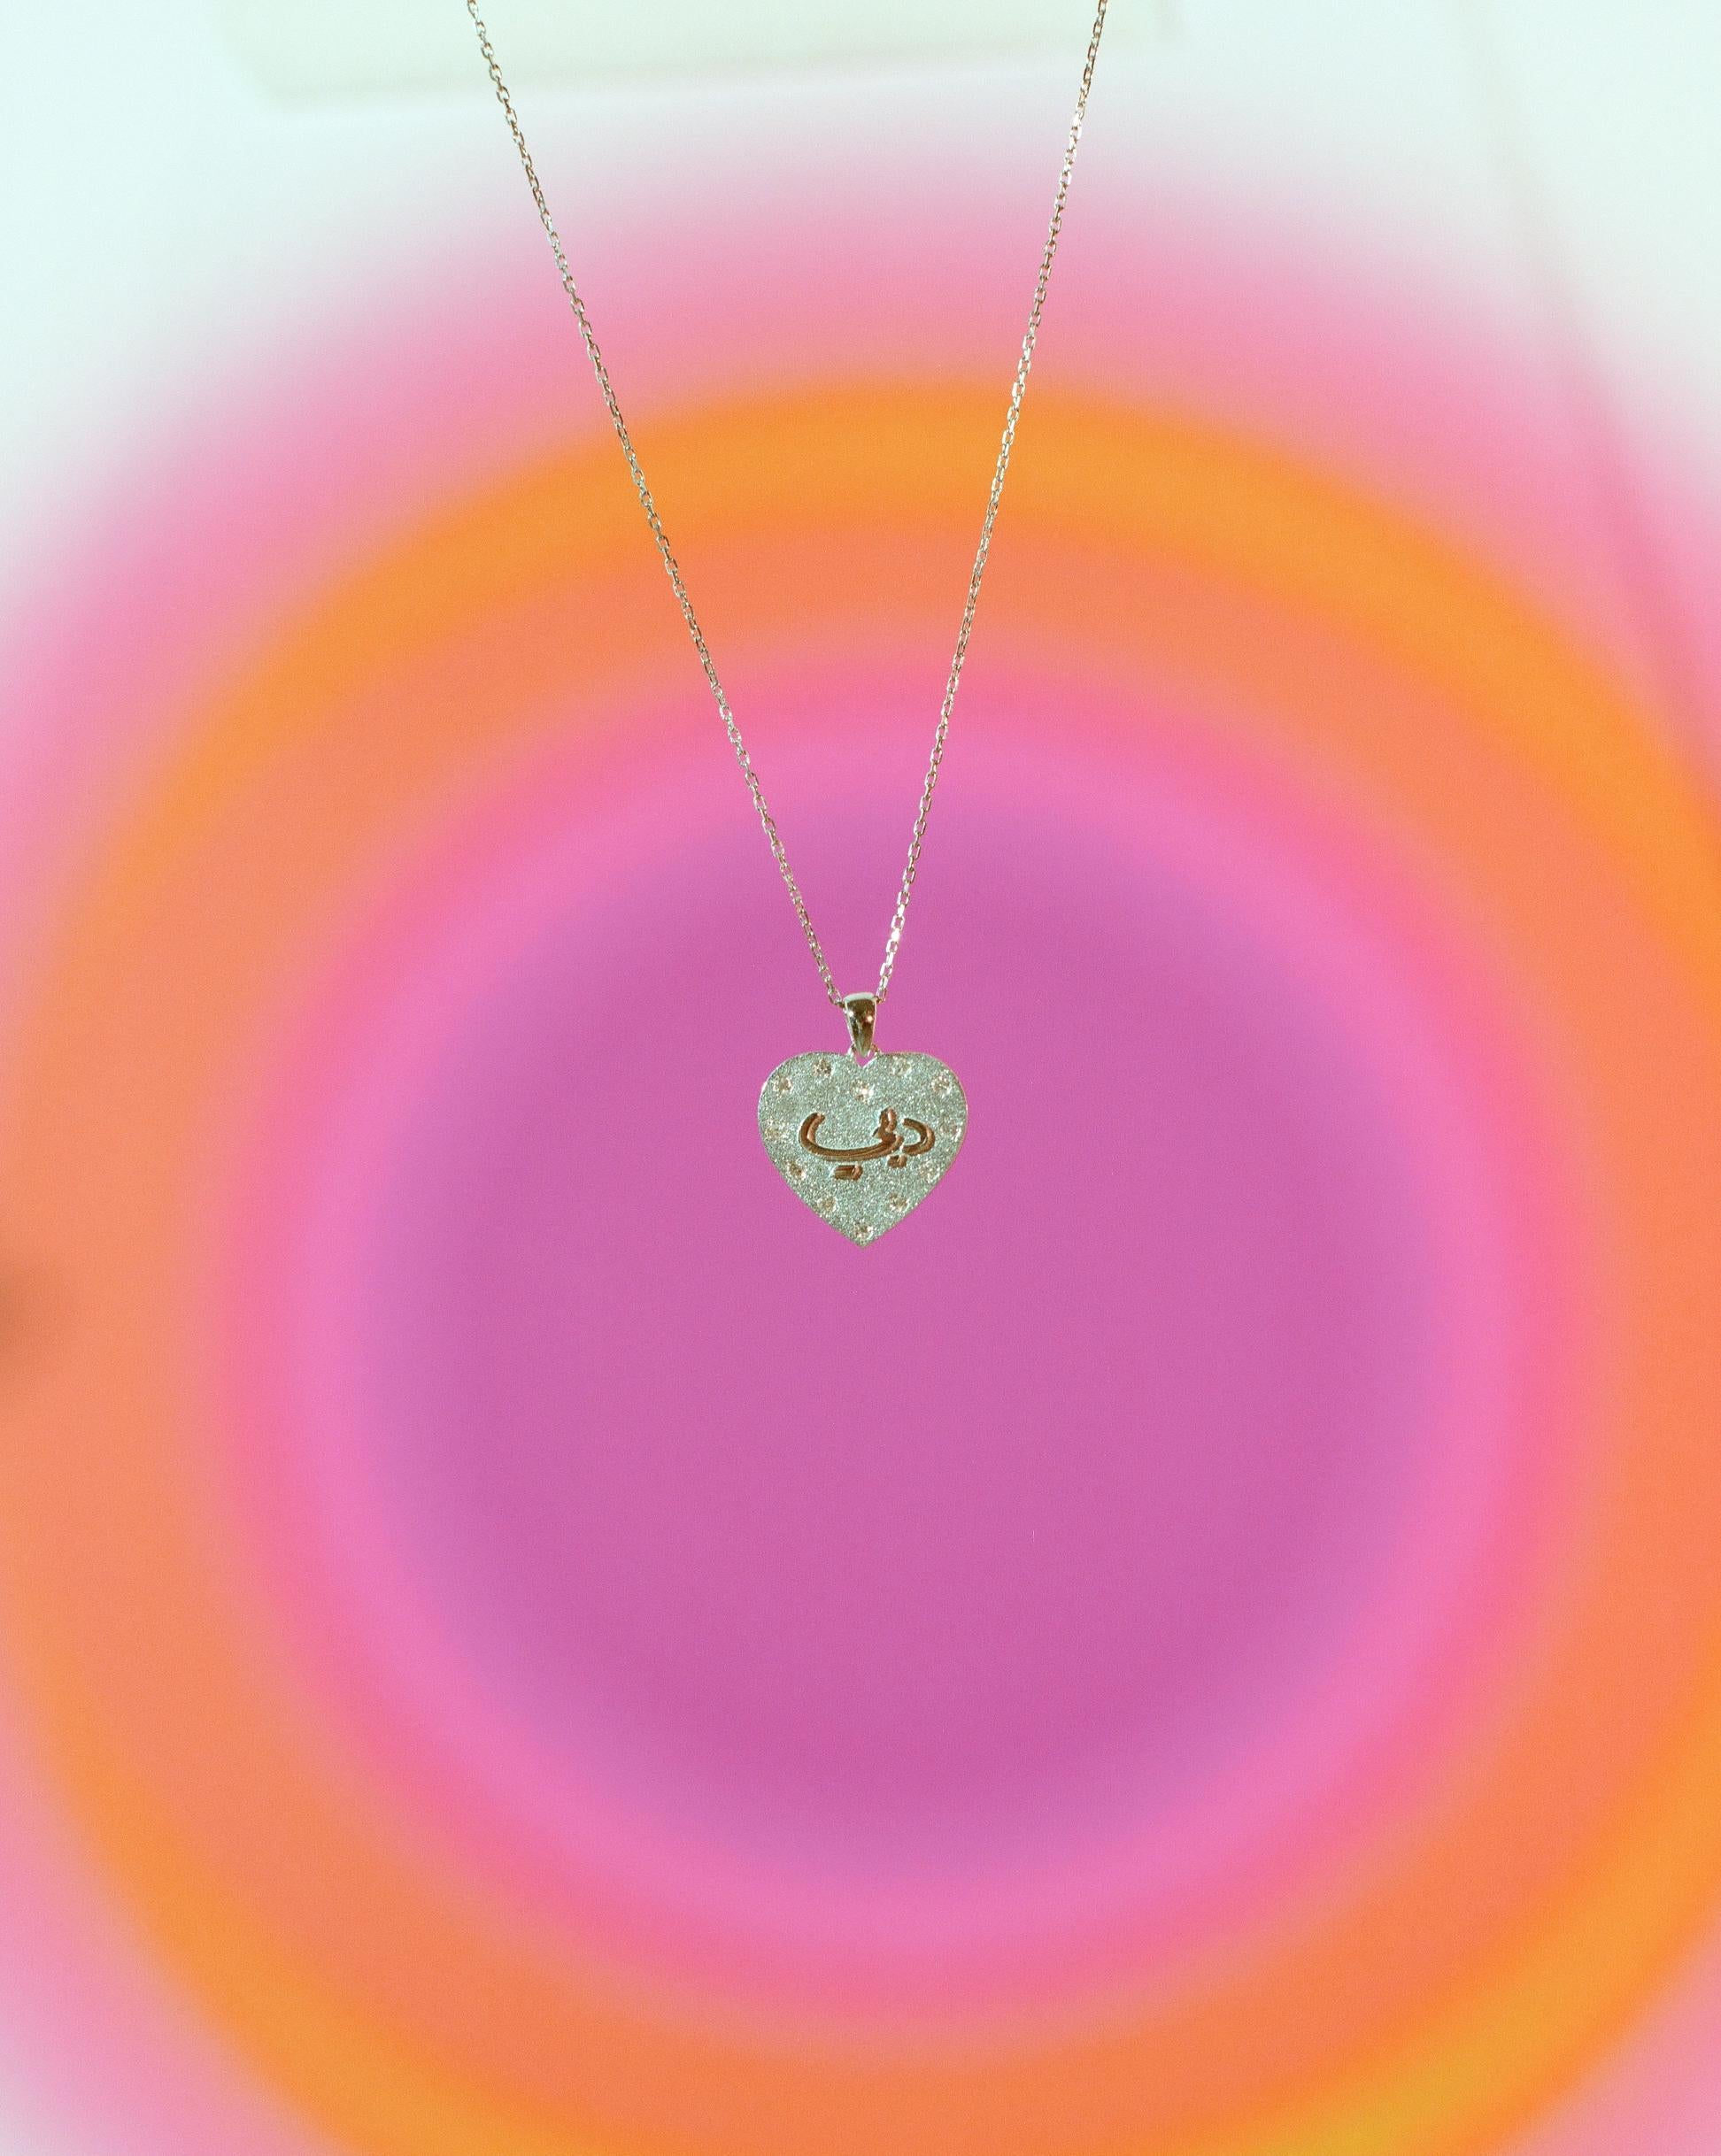 Artist Heart shaped white 18k Gold  adjustable chain Necklace.   For Sale